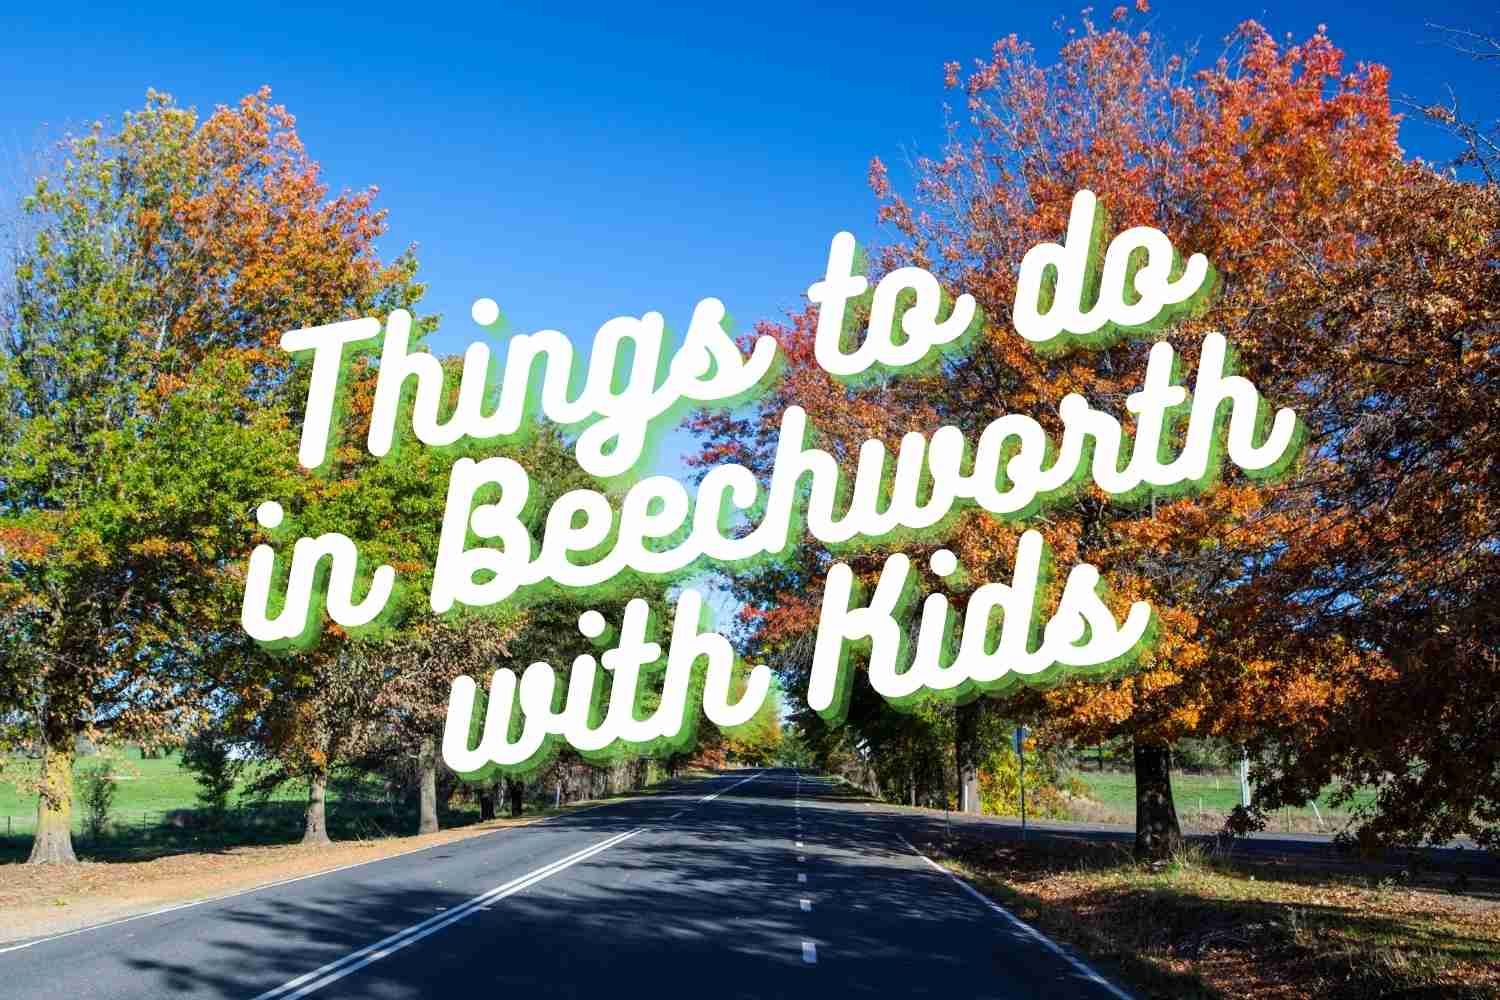 Things to do in Beechworth